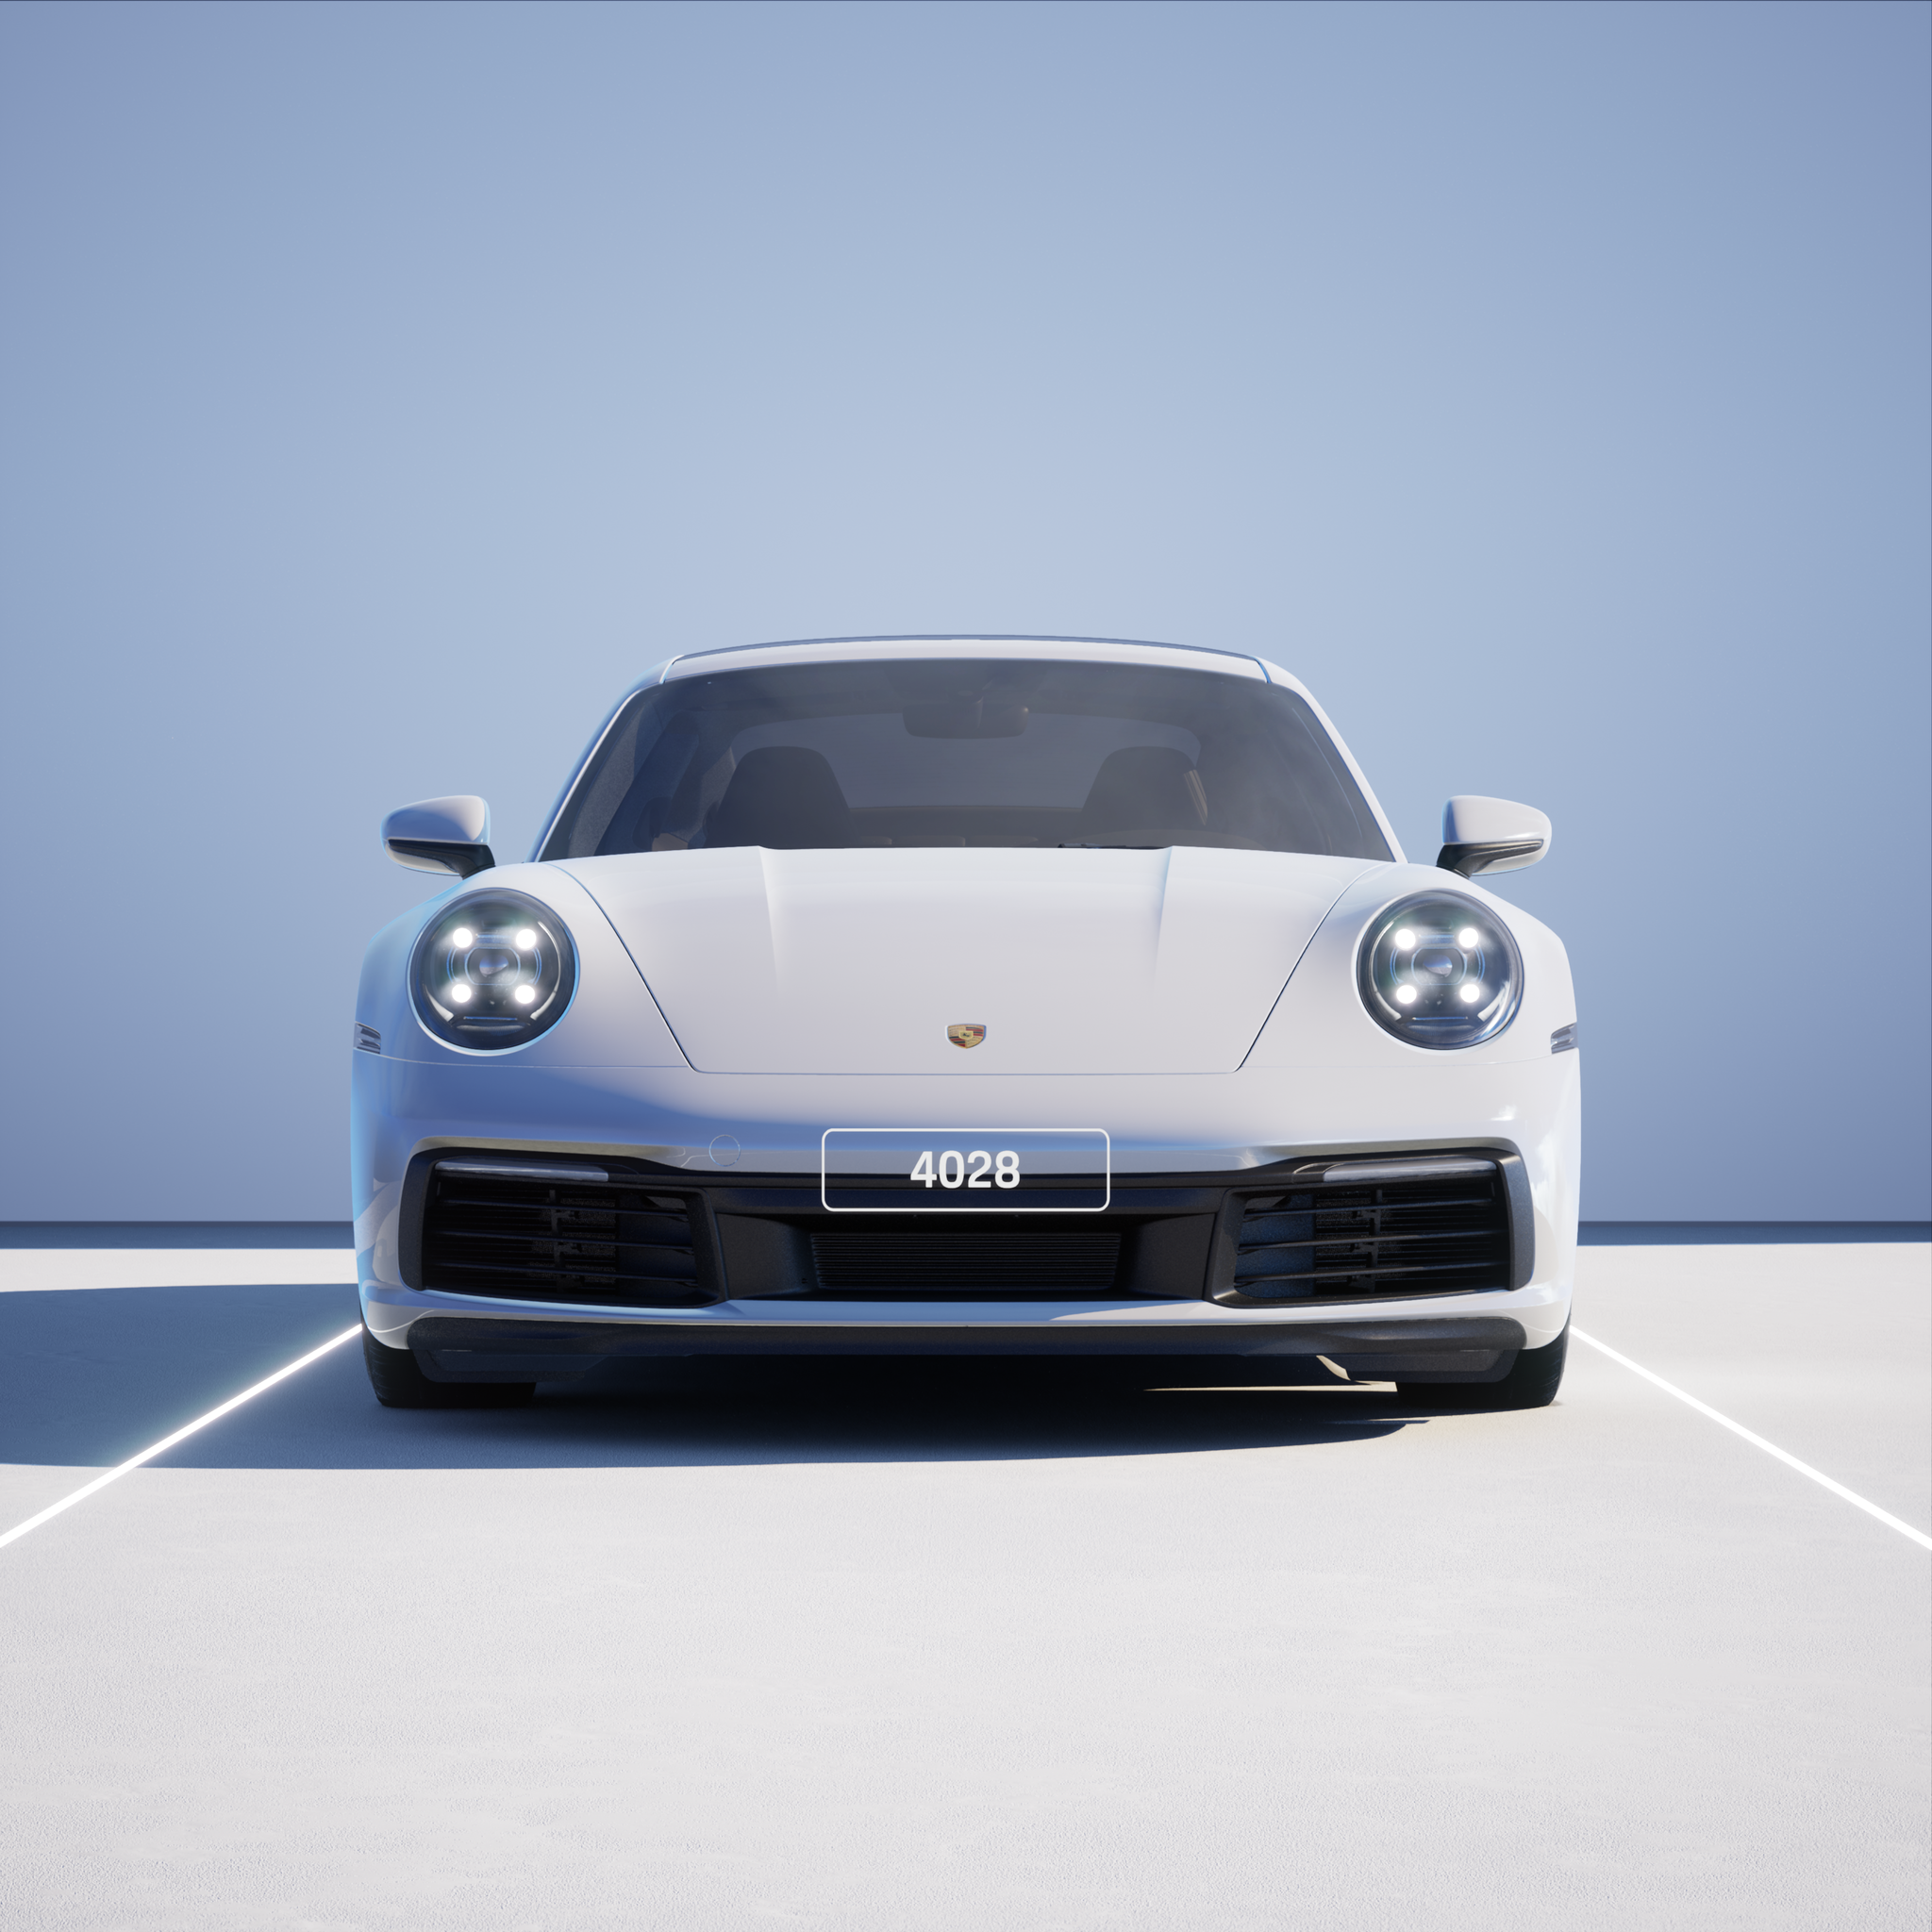 The PORSCHΞ 911 4028 image in phase